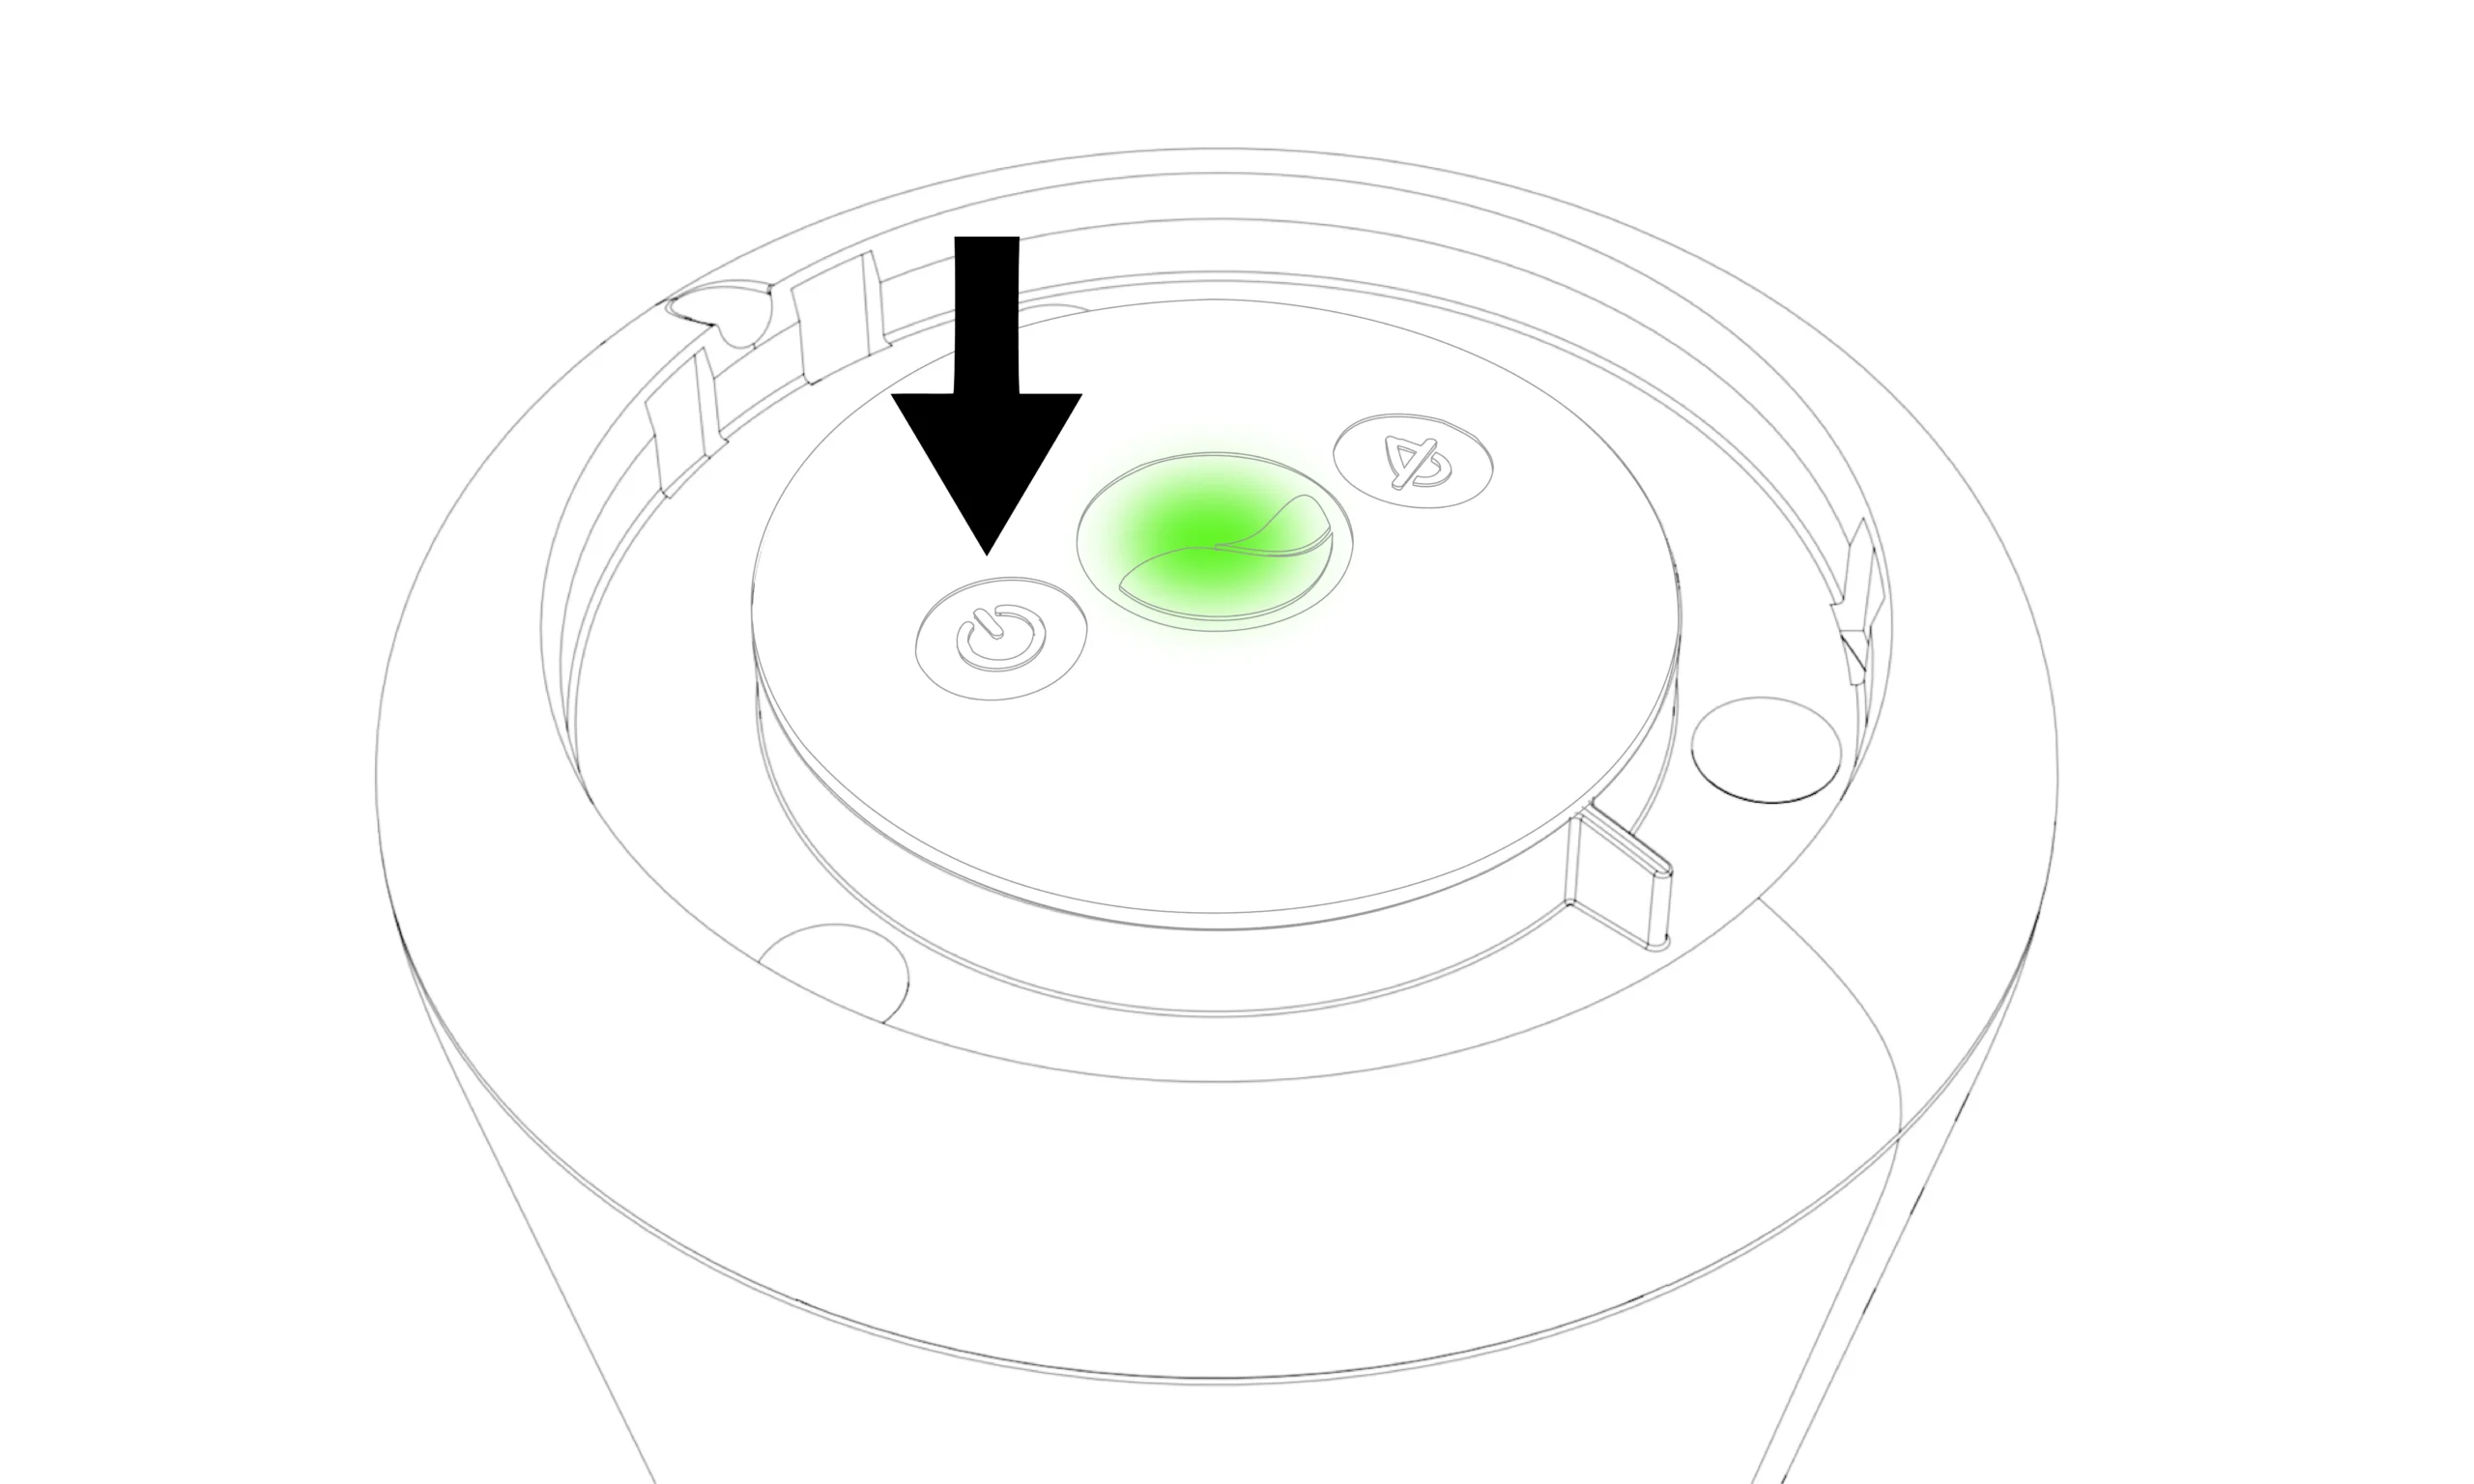 Diagram showing the location on ICO of the power button to start ICO